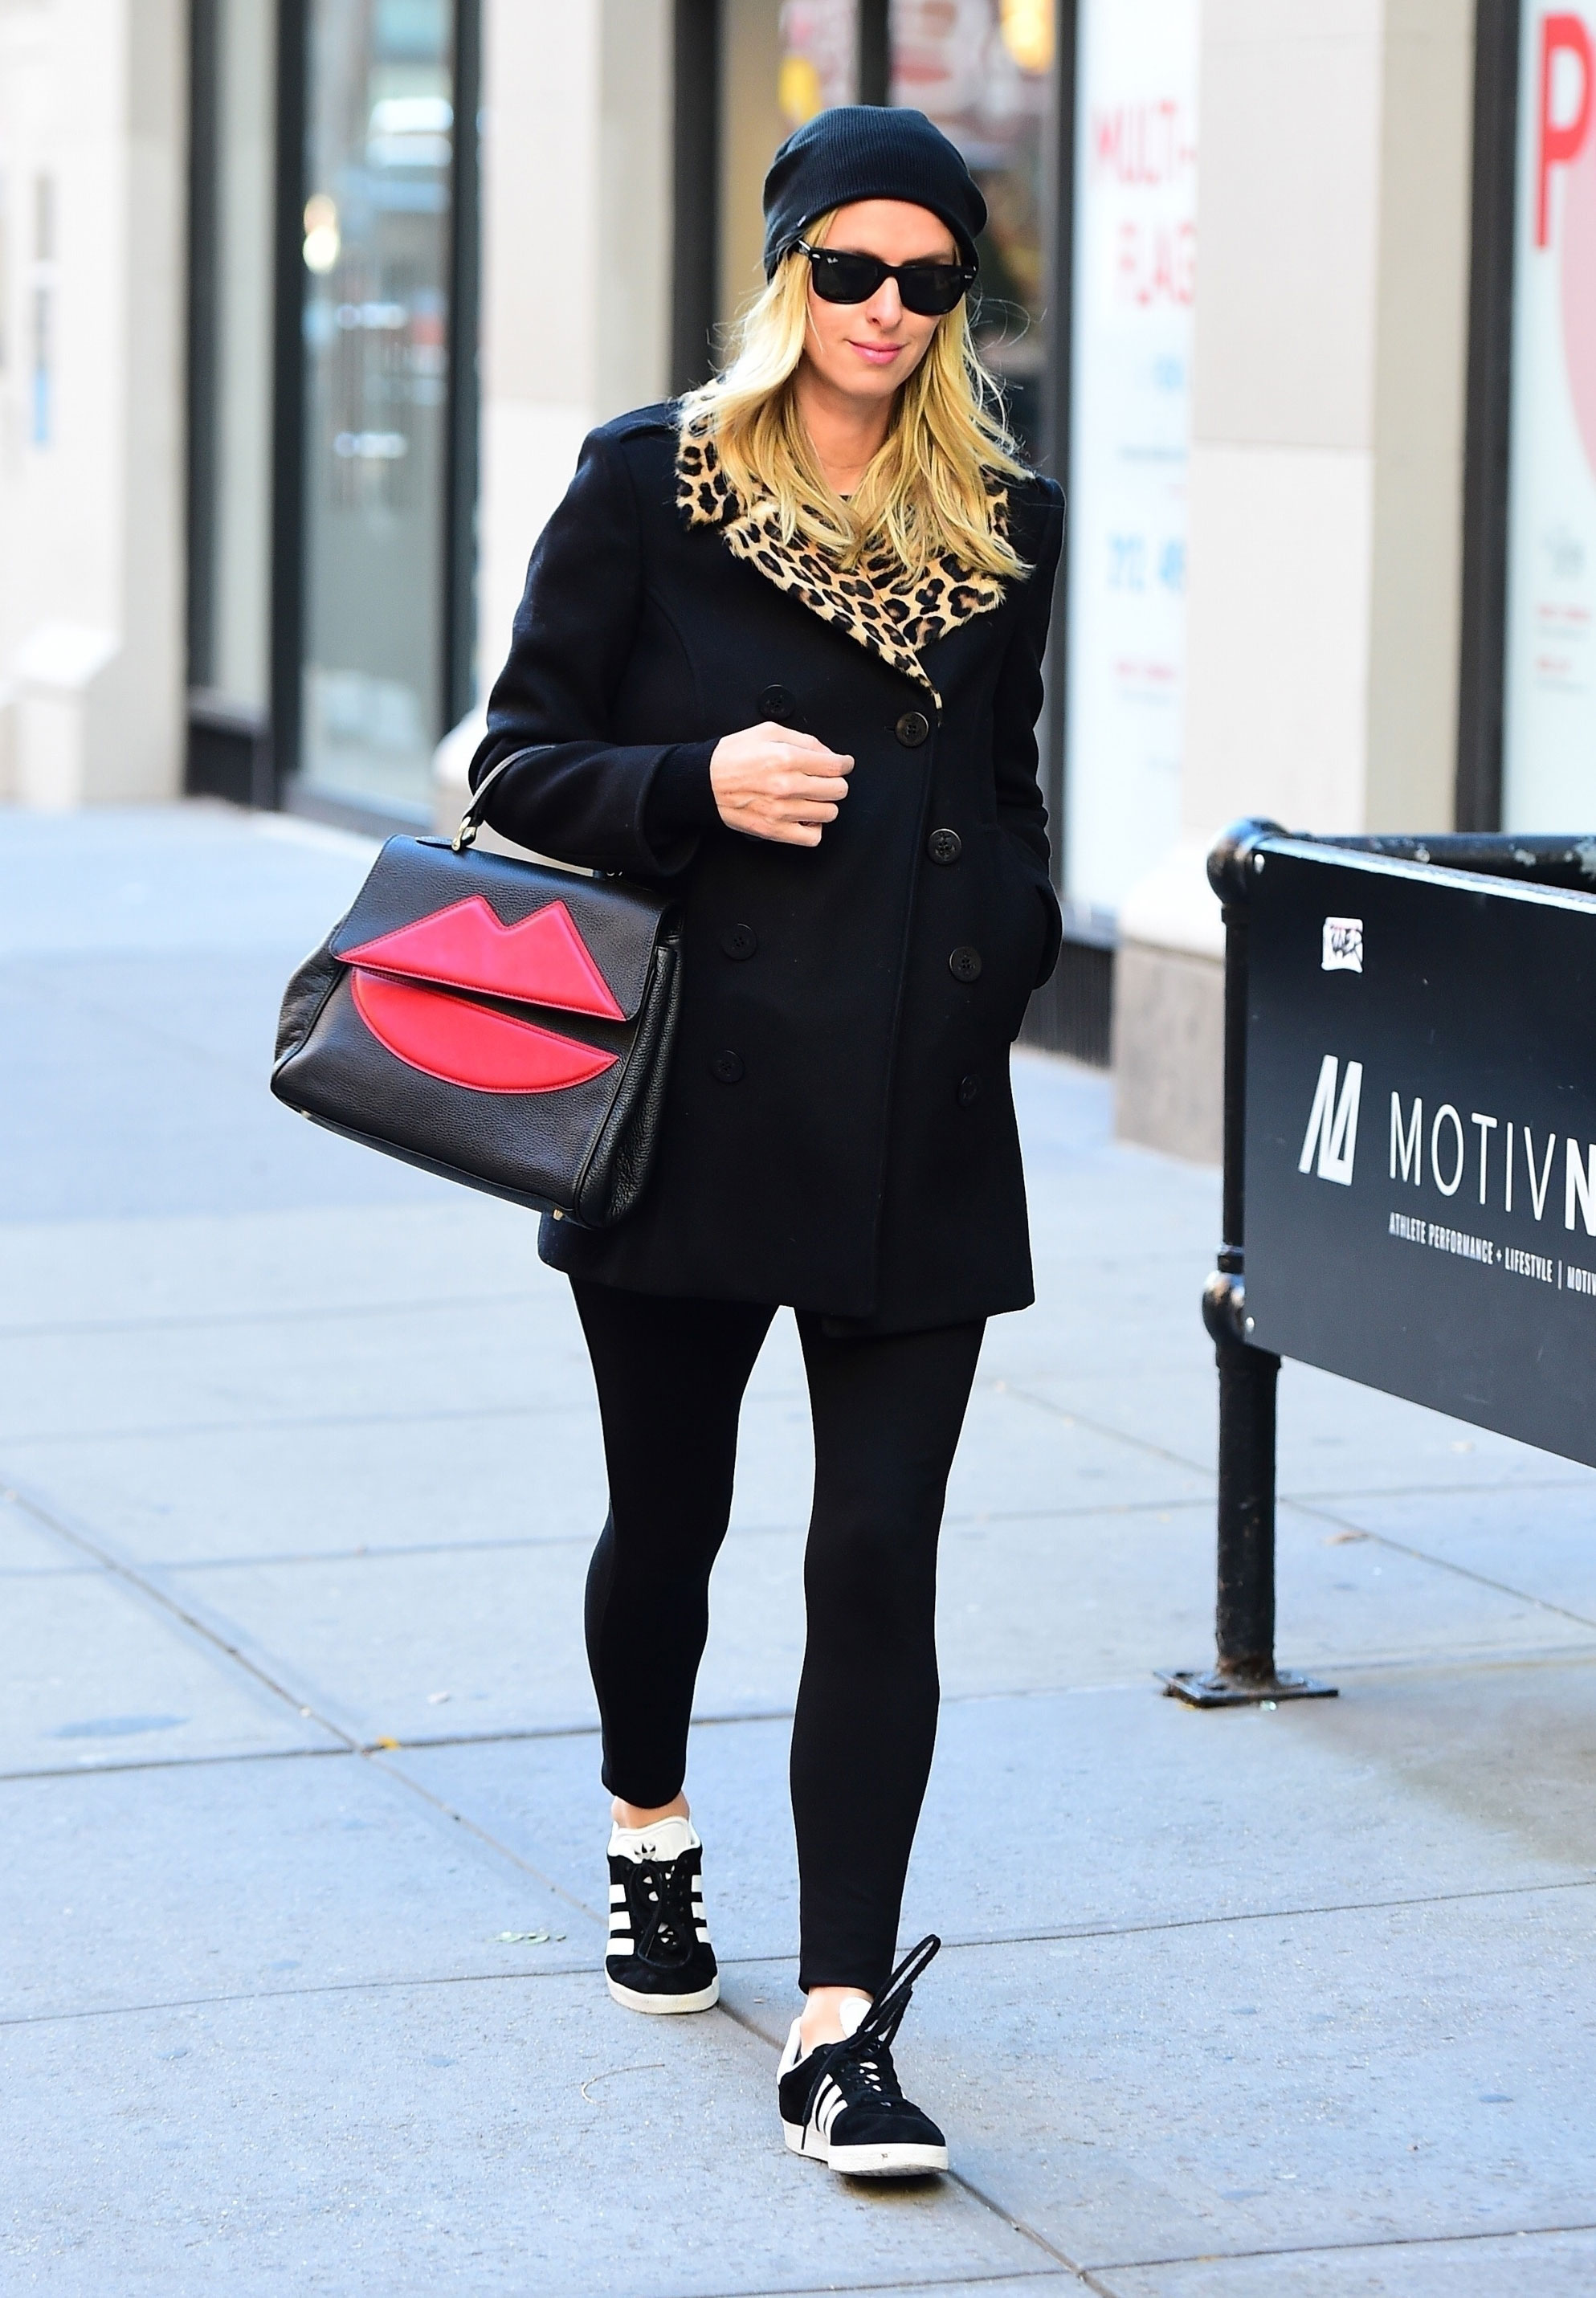 Nicky Hilton wears a black wool coat with leopard faux fur collar and red 'lips' bag by Sara Battaglia.